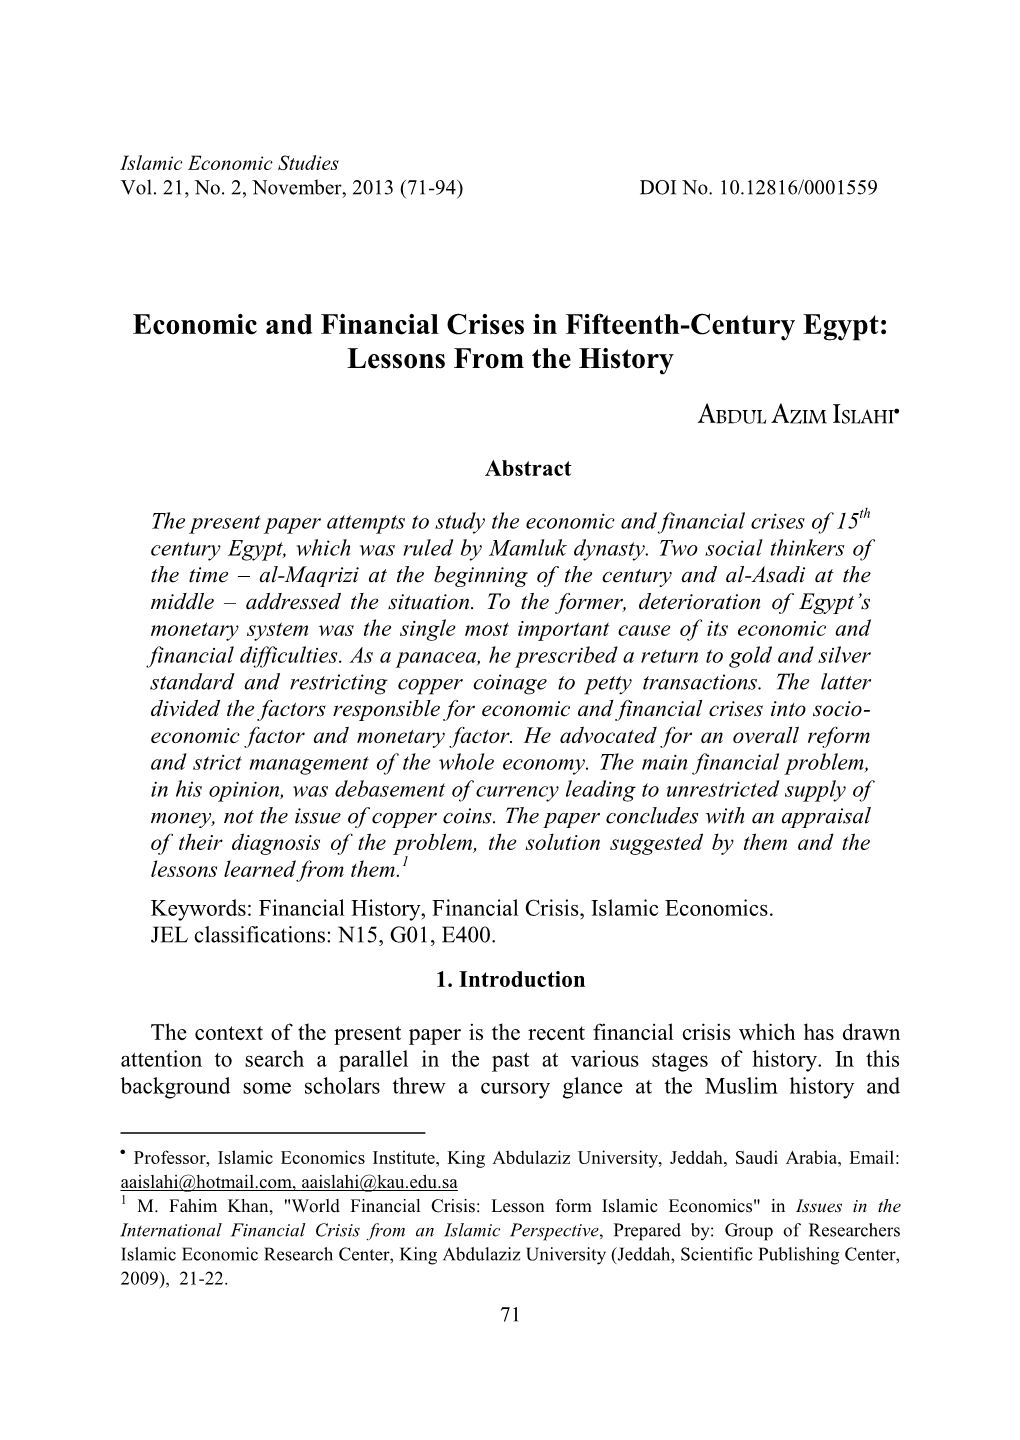 Economic and Financial Crises in Fifteenth-Century Egypt: Lessons from the History